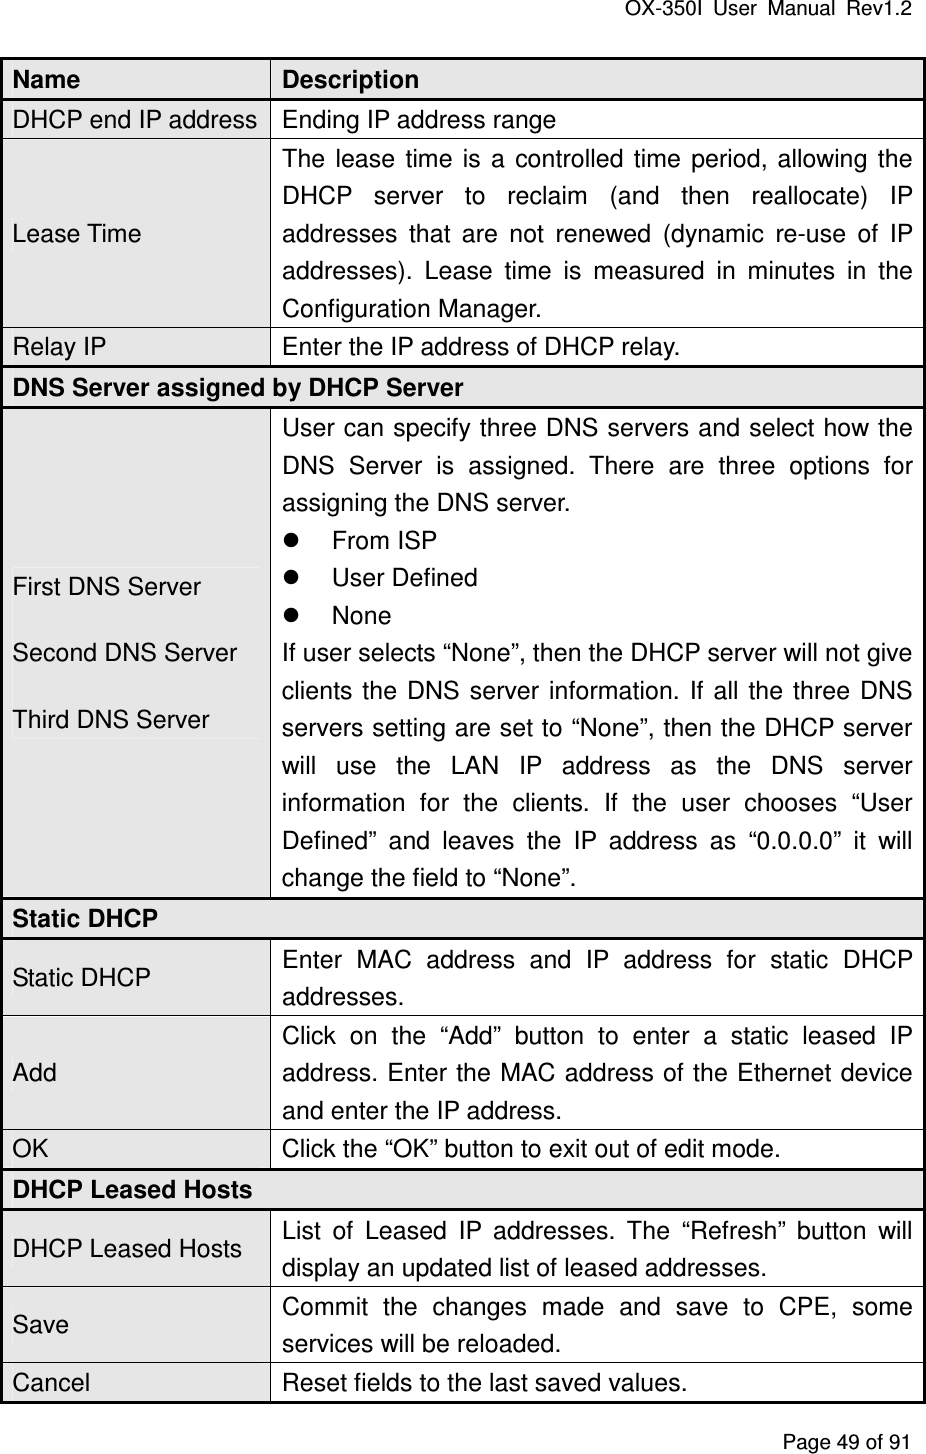 OX-350I  User  Manual  Rev1.2 Page 49 of 91 Name  Description DHCP end IP address Ending IP address range Lease Time The  lease  time  is  a  controlled  time  period, allowing  the DHCP  server  to  reclaim  (and  then  reallocate)  IP addresses  that  are  not  renewed  (dynamic  re-use  of  IP addresses).  Lease  time  is  measured  in  minutes  in  the Configuration Manager. Relay IP  Enter the IP address of DHCP relay. DNS Server assigned by DHCP Server First DNS Server Second DNS Server Third DNS Server User can specify three DNS servers and select how the DNS  Server  is  assigned.  There  are  three  options  for assigning the DNS server.   From ISP   User Defined   None If user selects “None”, then the DHCP server will not give clients the  DNS  server  information.  If  all  the  three  DNS servers setting are set to “None”, then the DHCP server will  use  the  LAN  IP  address  as  the  DNS  server information  for  the  clients.  If  the  user  chooses  “User Defined”  and  leaves  the  IP  address  as  “0.0.0.0”  it  will change the field to “None”. Static DHCP Static DHCP  Enter  MAC  address  and  IP  address  for  static  DHCP addresses. Add Click  on  the  “Add”  button  to  enter  a  static  leased  IP address. Enter the MAC address of the Ethernet device and enter the IP address. OK  Click the “OK” button to exit out of edit mode. DHCP Leased Hosts DHCP Leased Hosts  List  of  Leased  IP  addresses.  The  “Refresh”  button  will display an updated list of leased addresses. Save  Commit  the  changes  made  and  save  to  CPE,  some services will be reloaded. Cancel  Reset fields to the last saved values. 